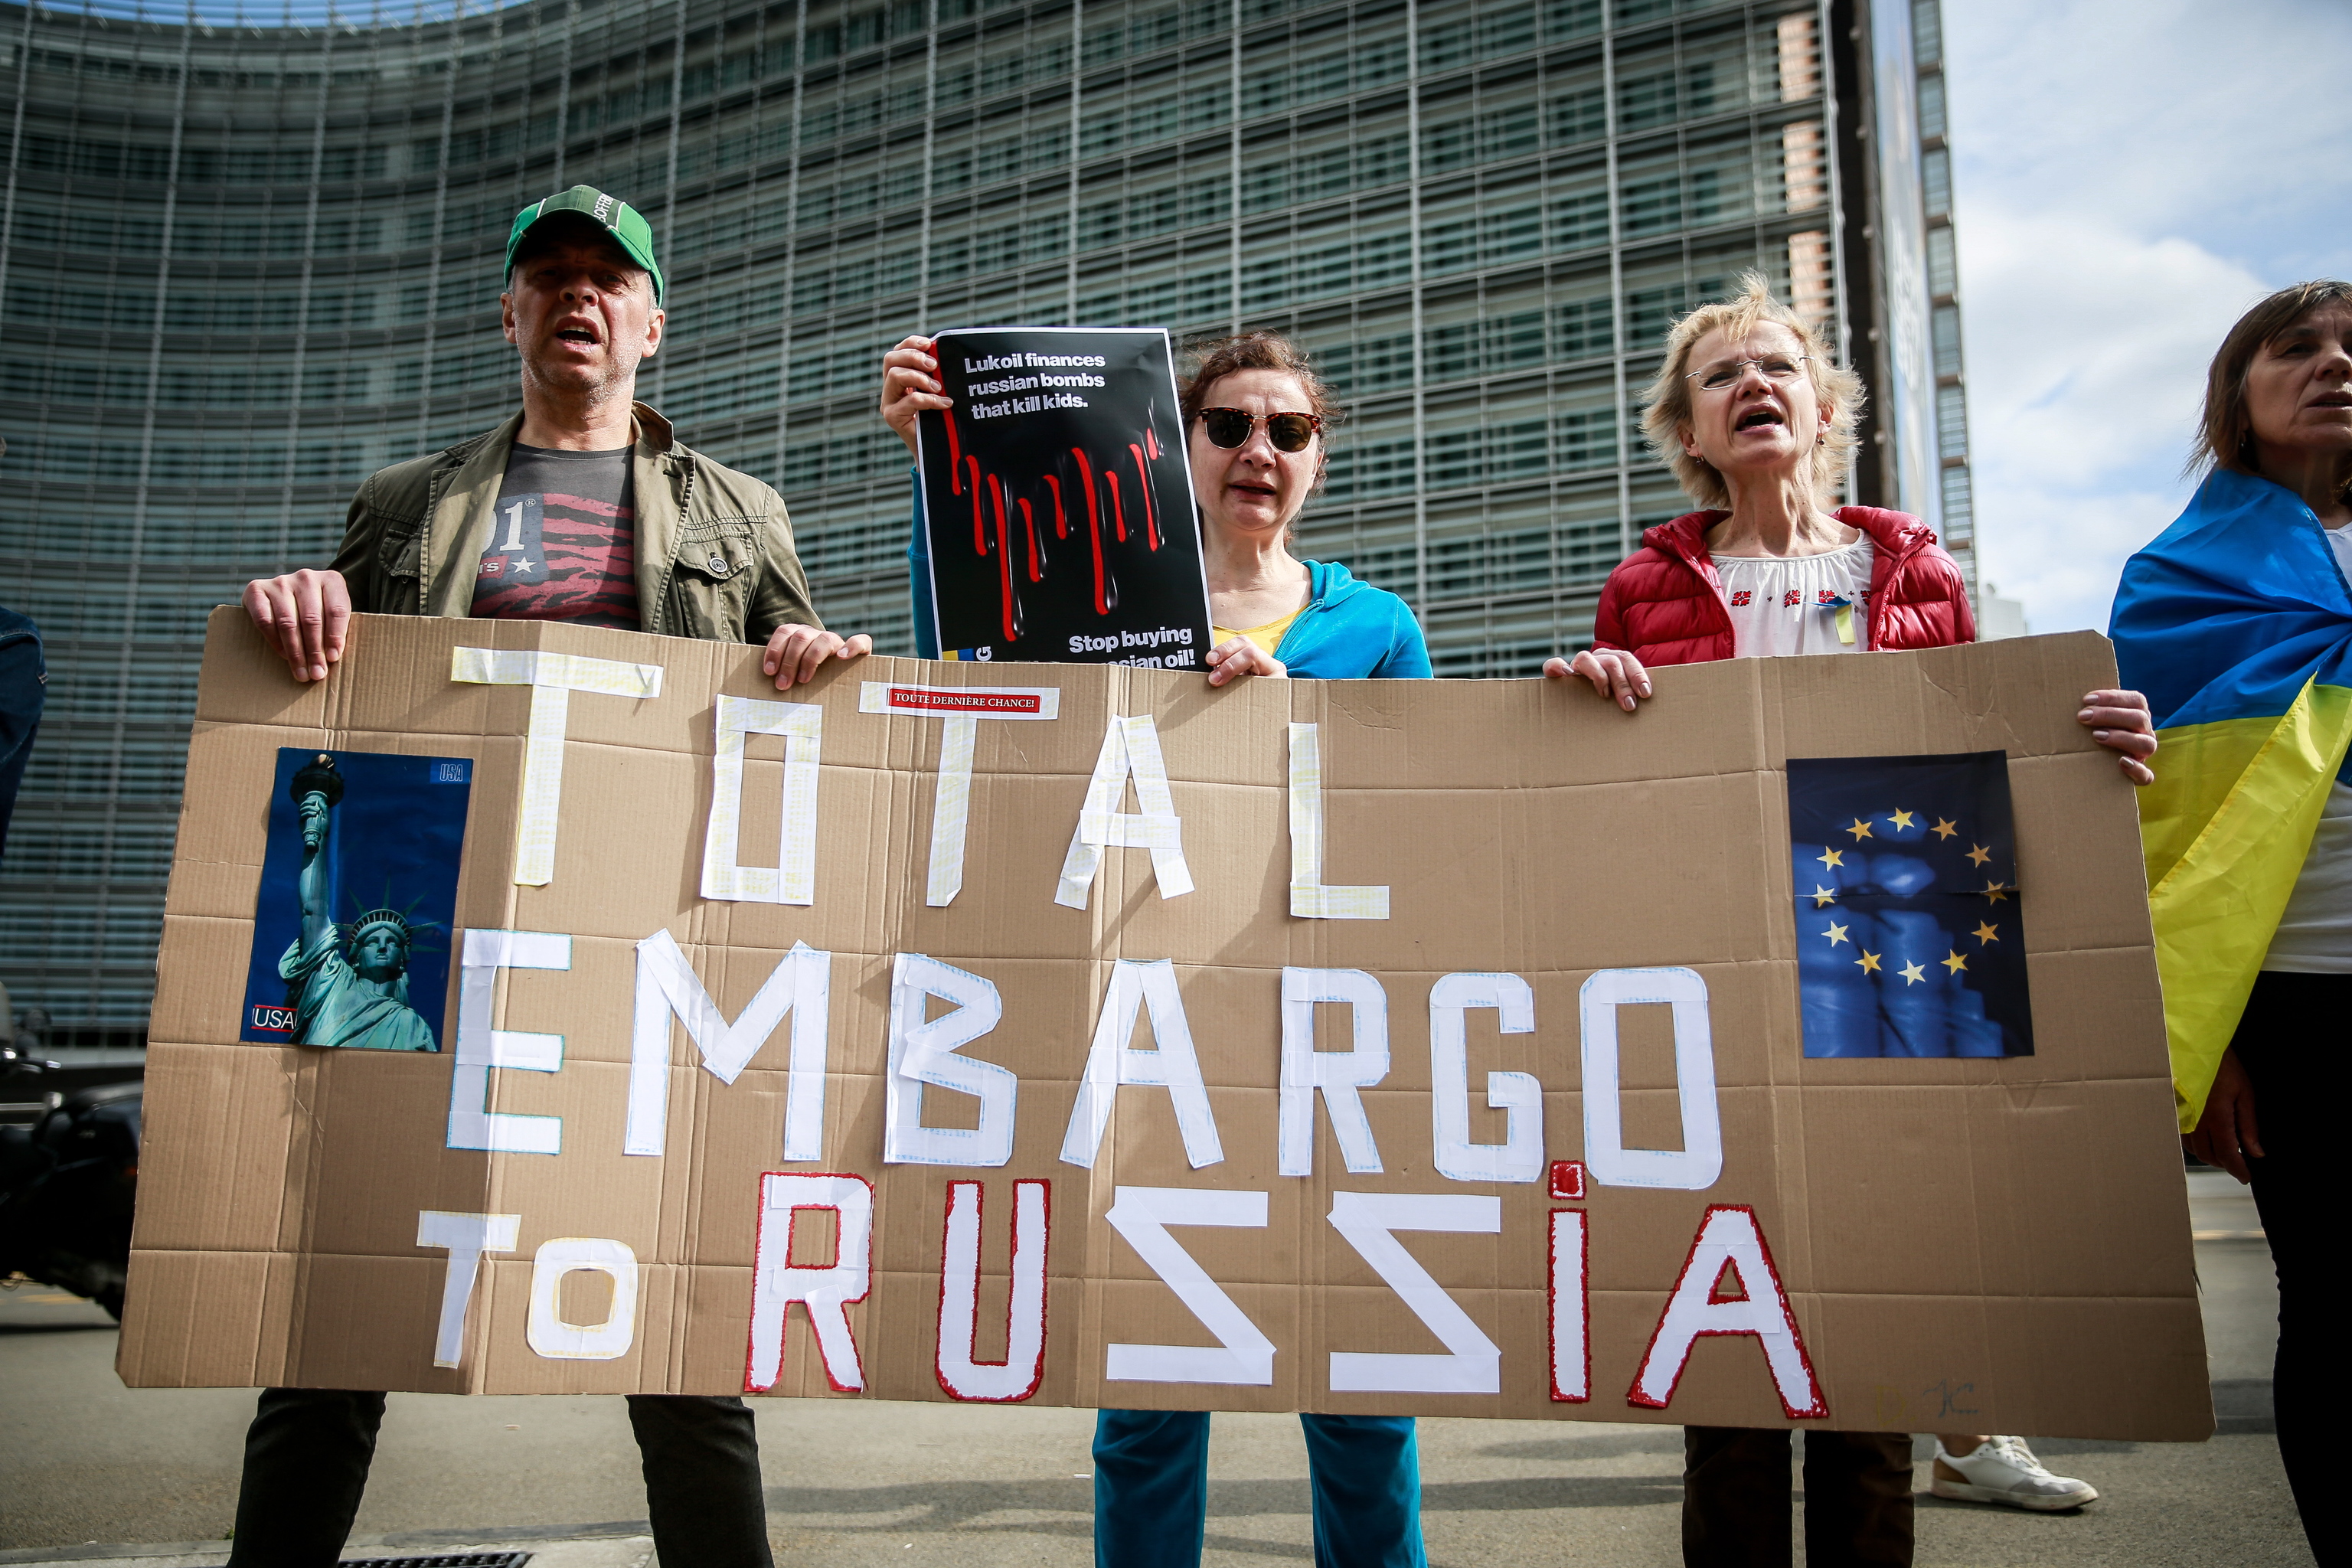 Citizens of Ukraine demand a ban on Petri in Brussels